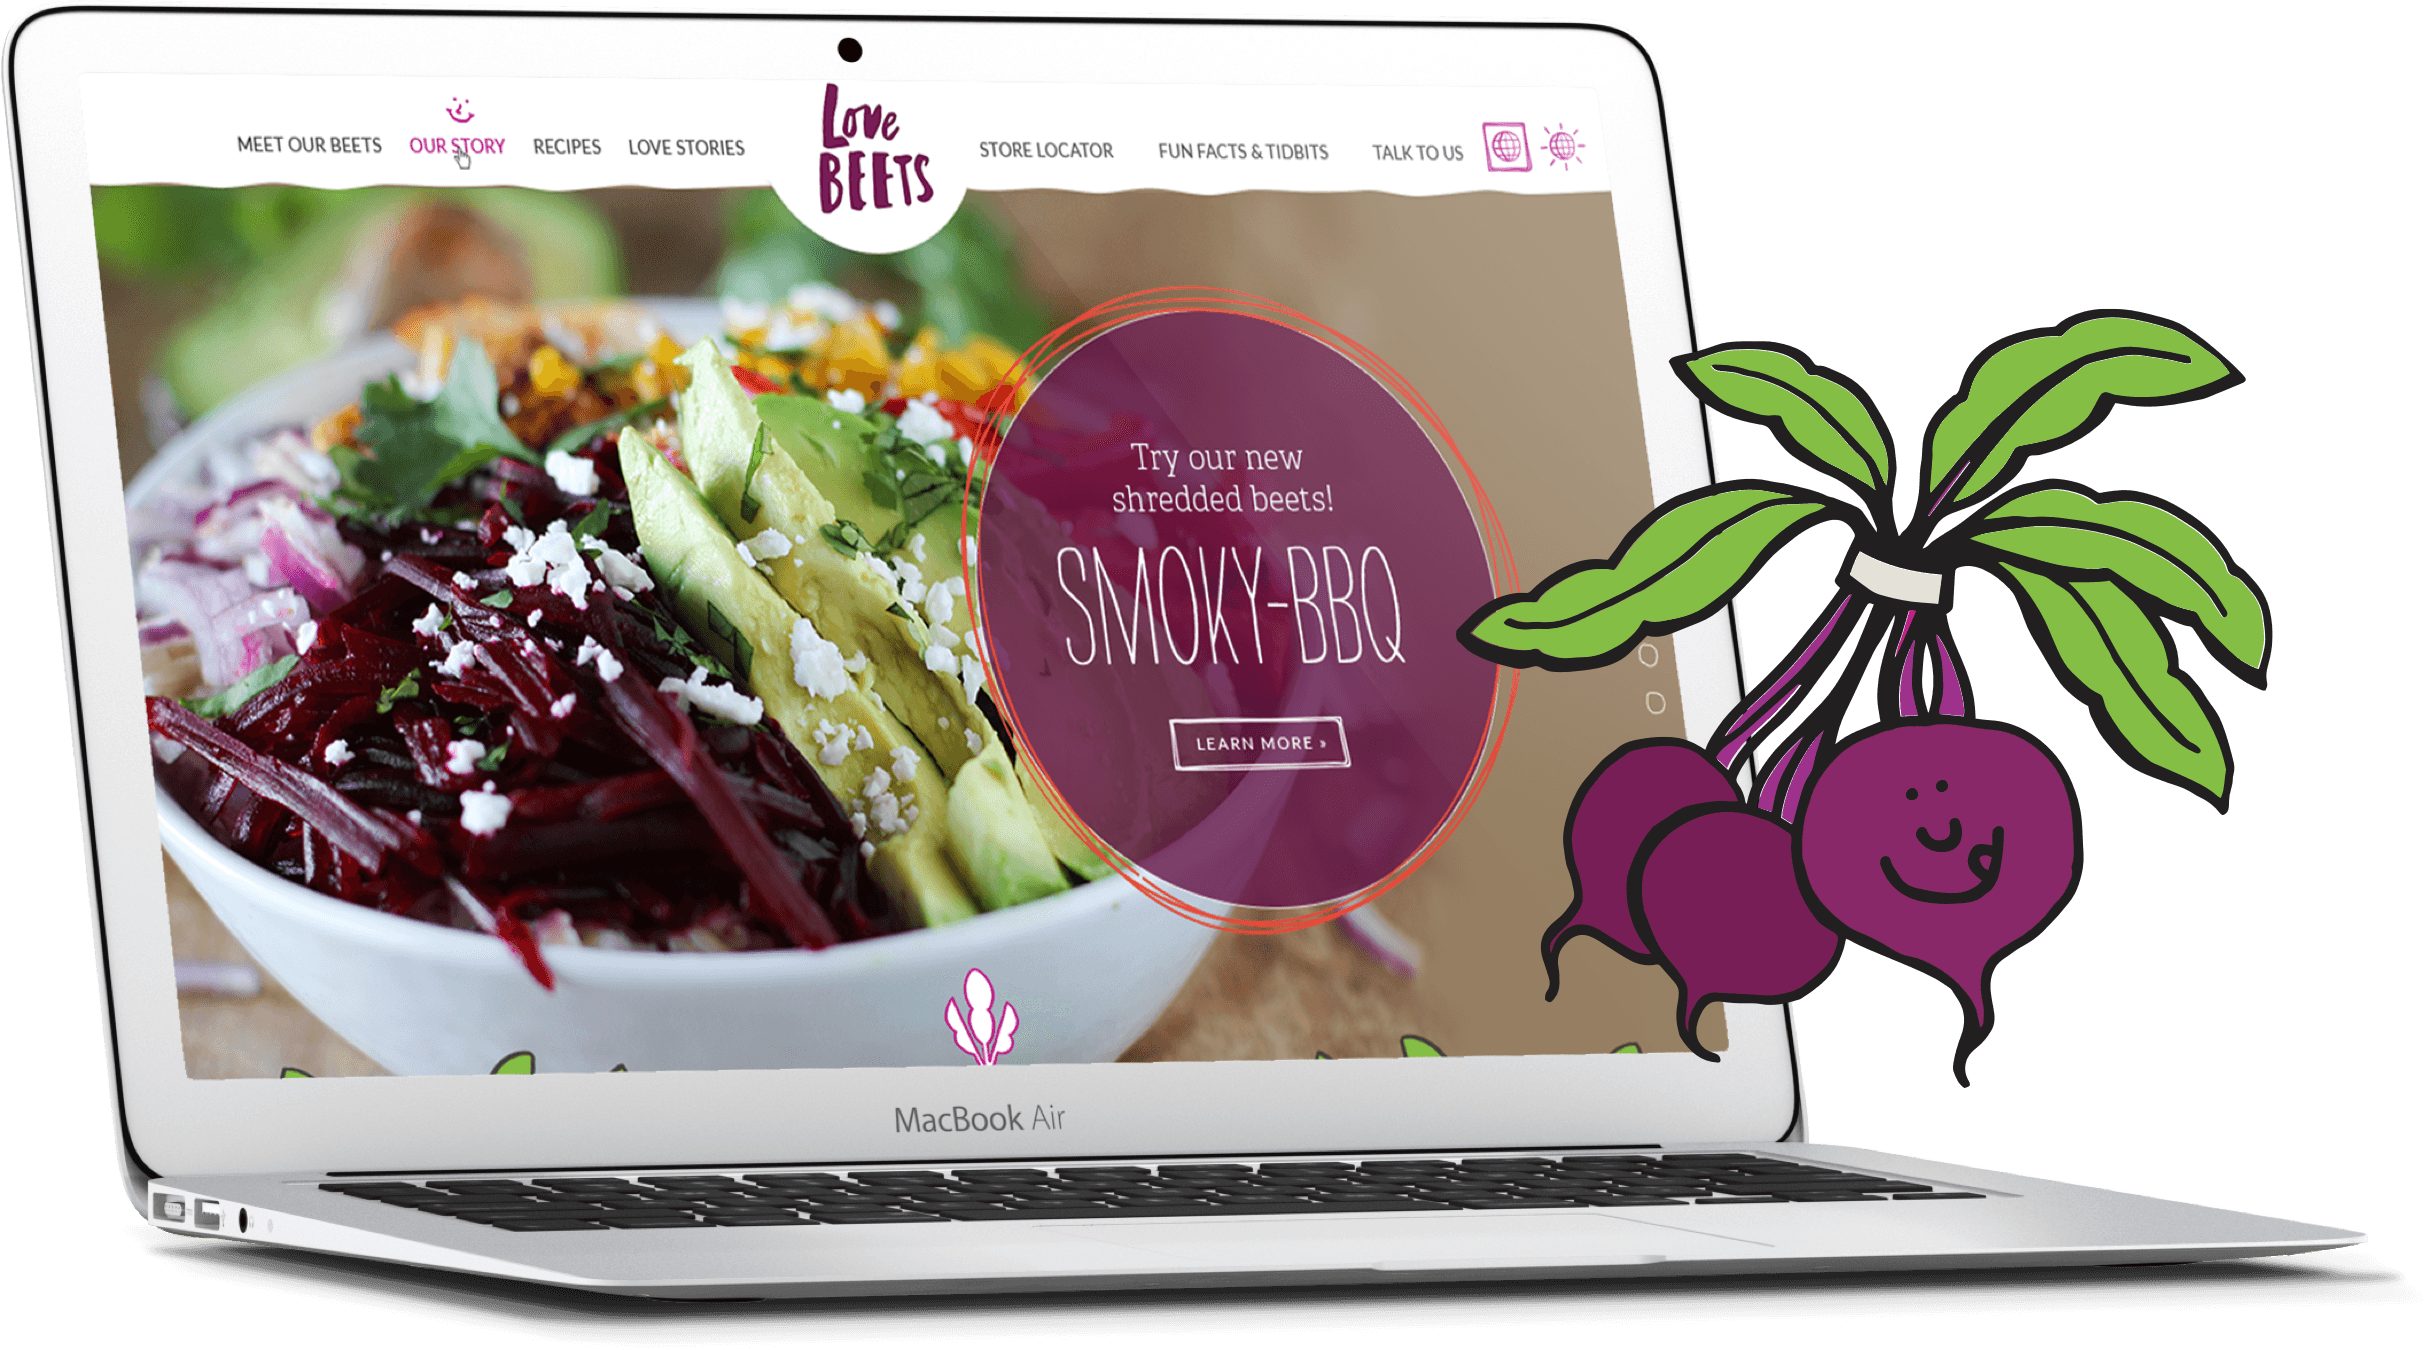 Web Design for Organic Food and Beverage Companies